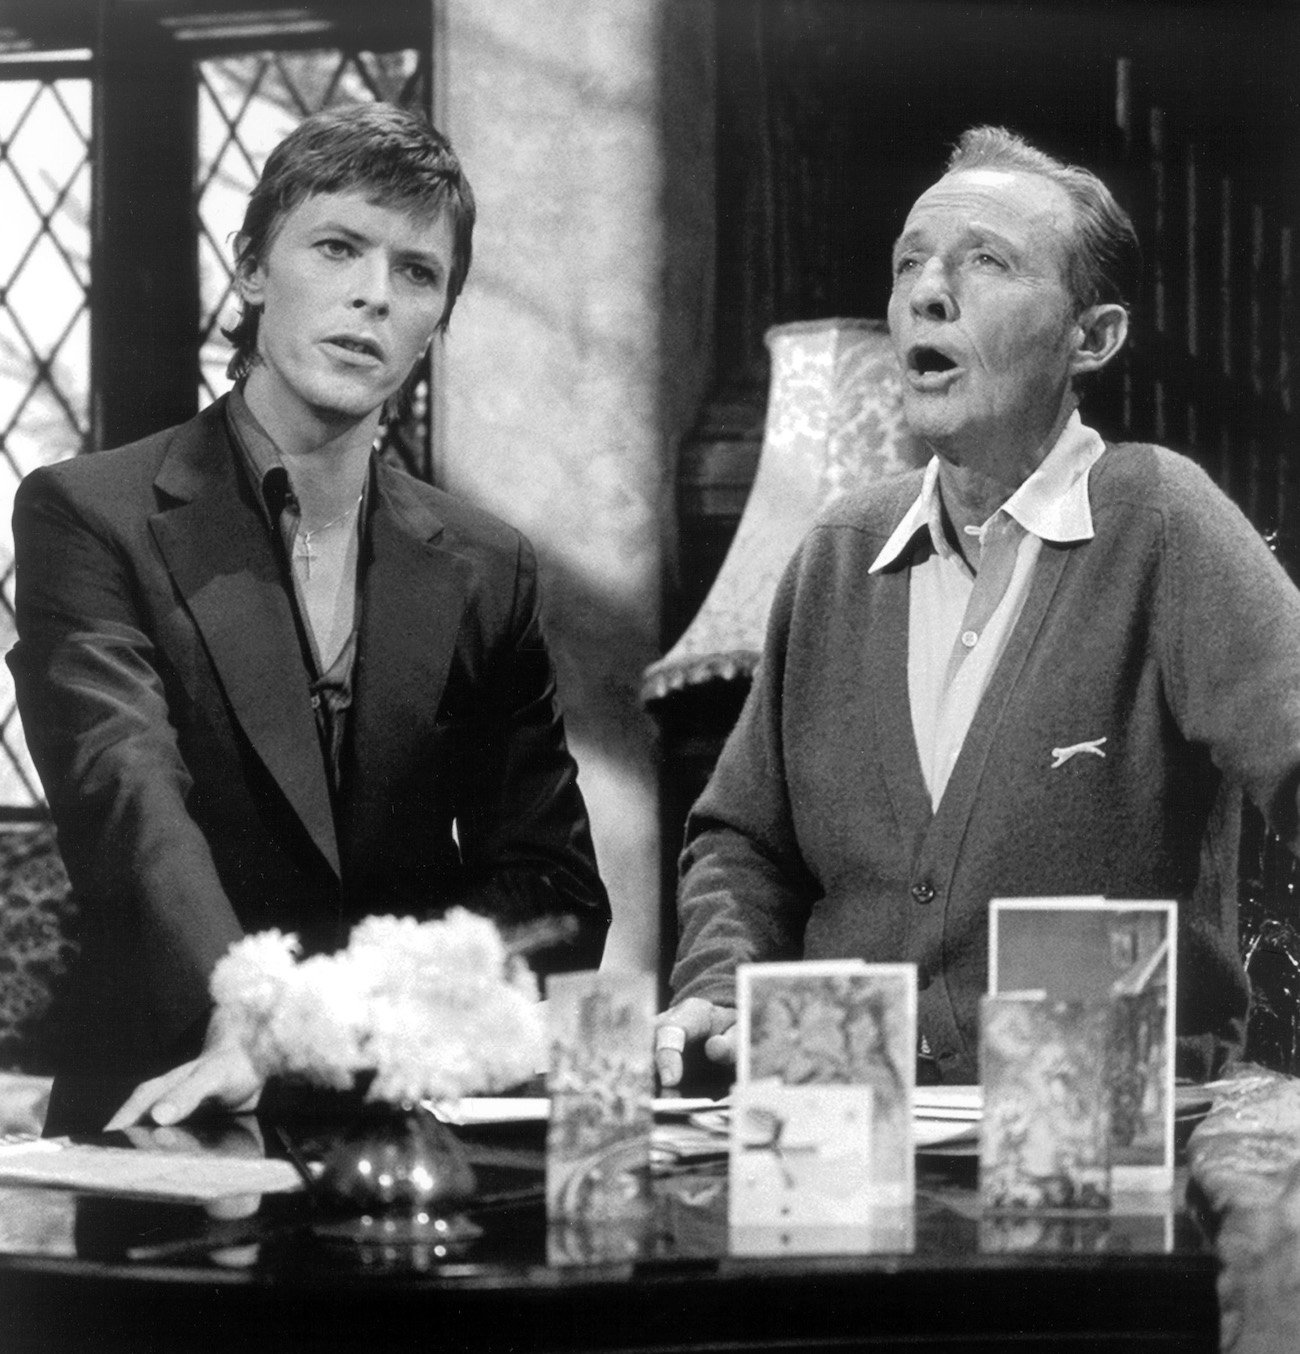 David Bowie and Bing Crosby singing during the TV special 'Bing Crosby's Merrie Olde Christmas' in 1977.